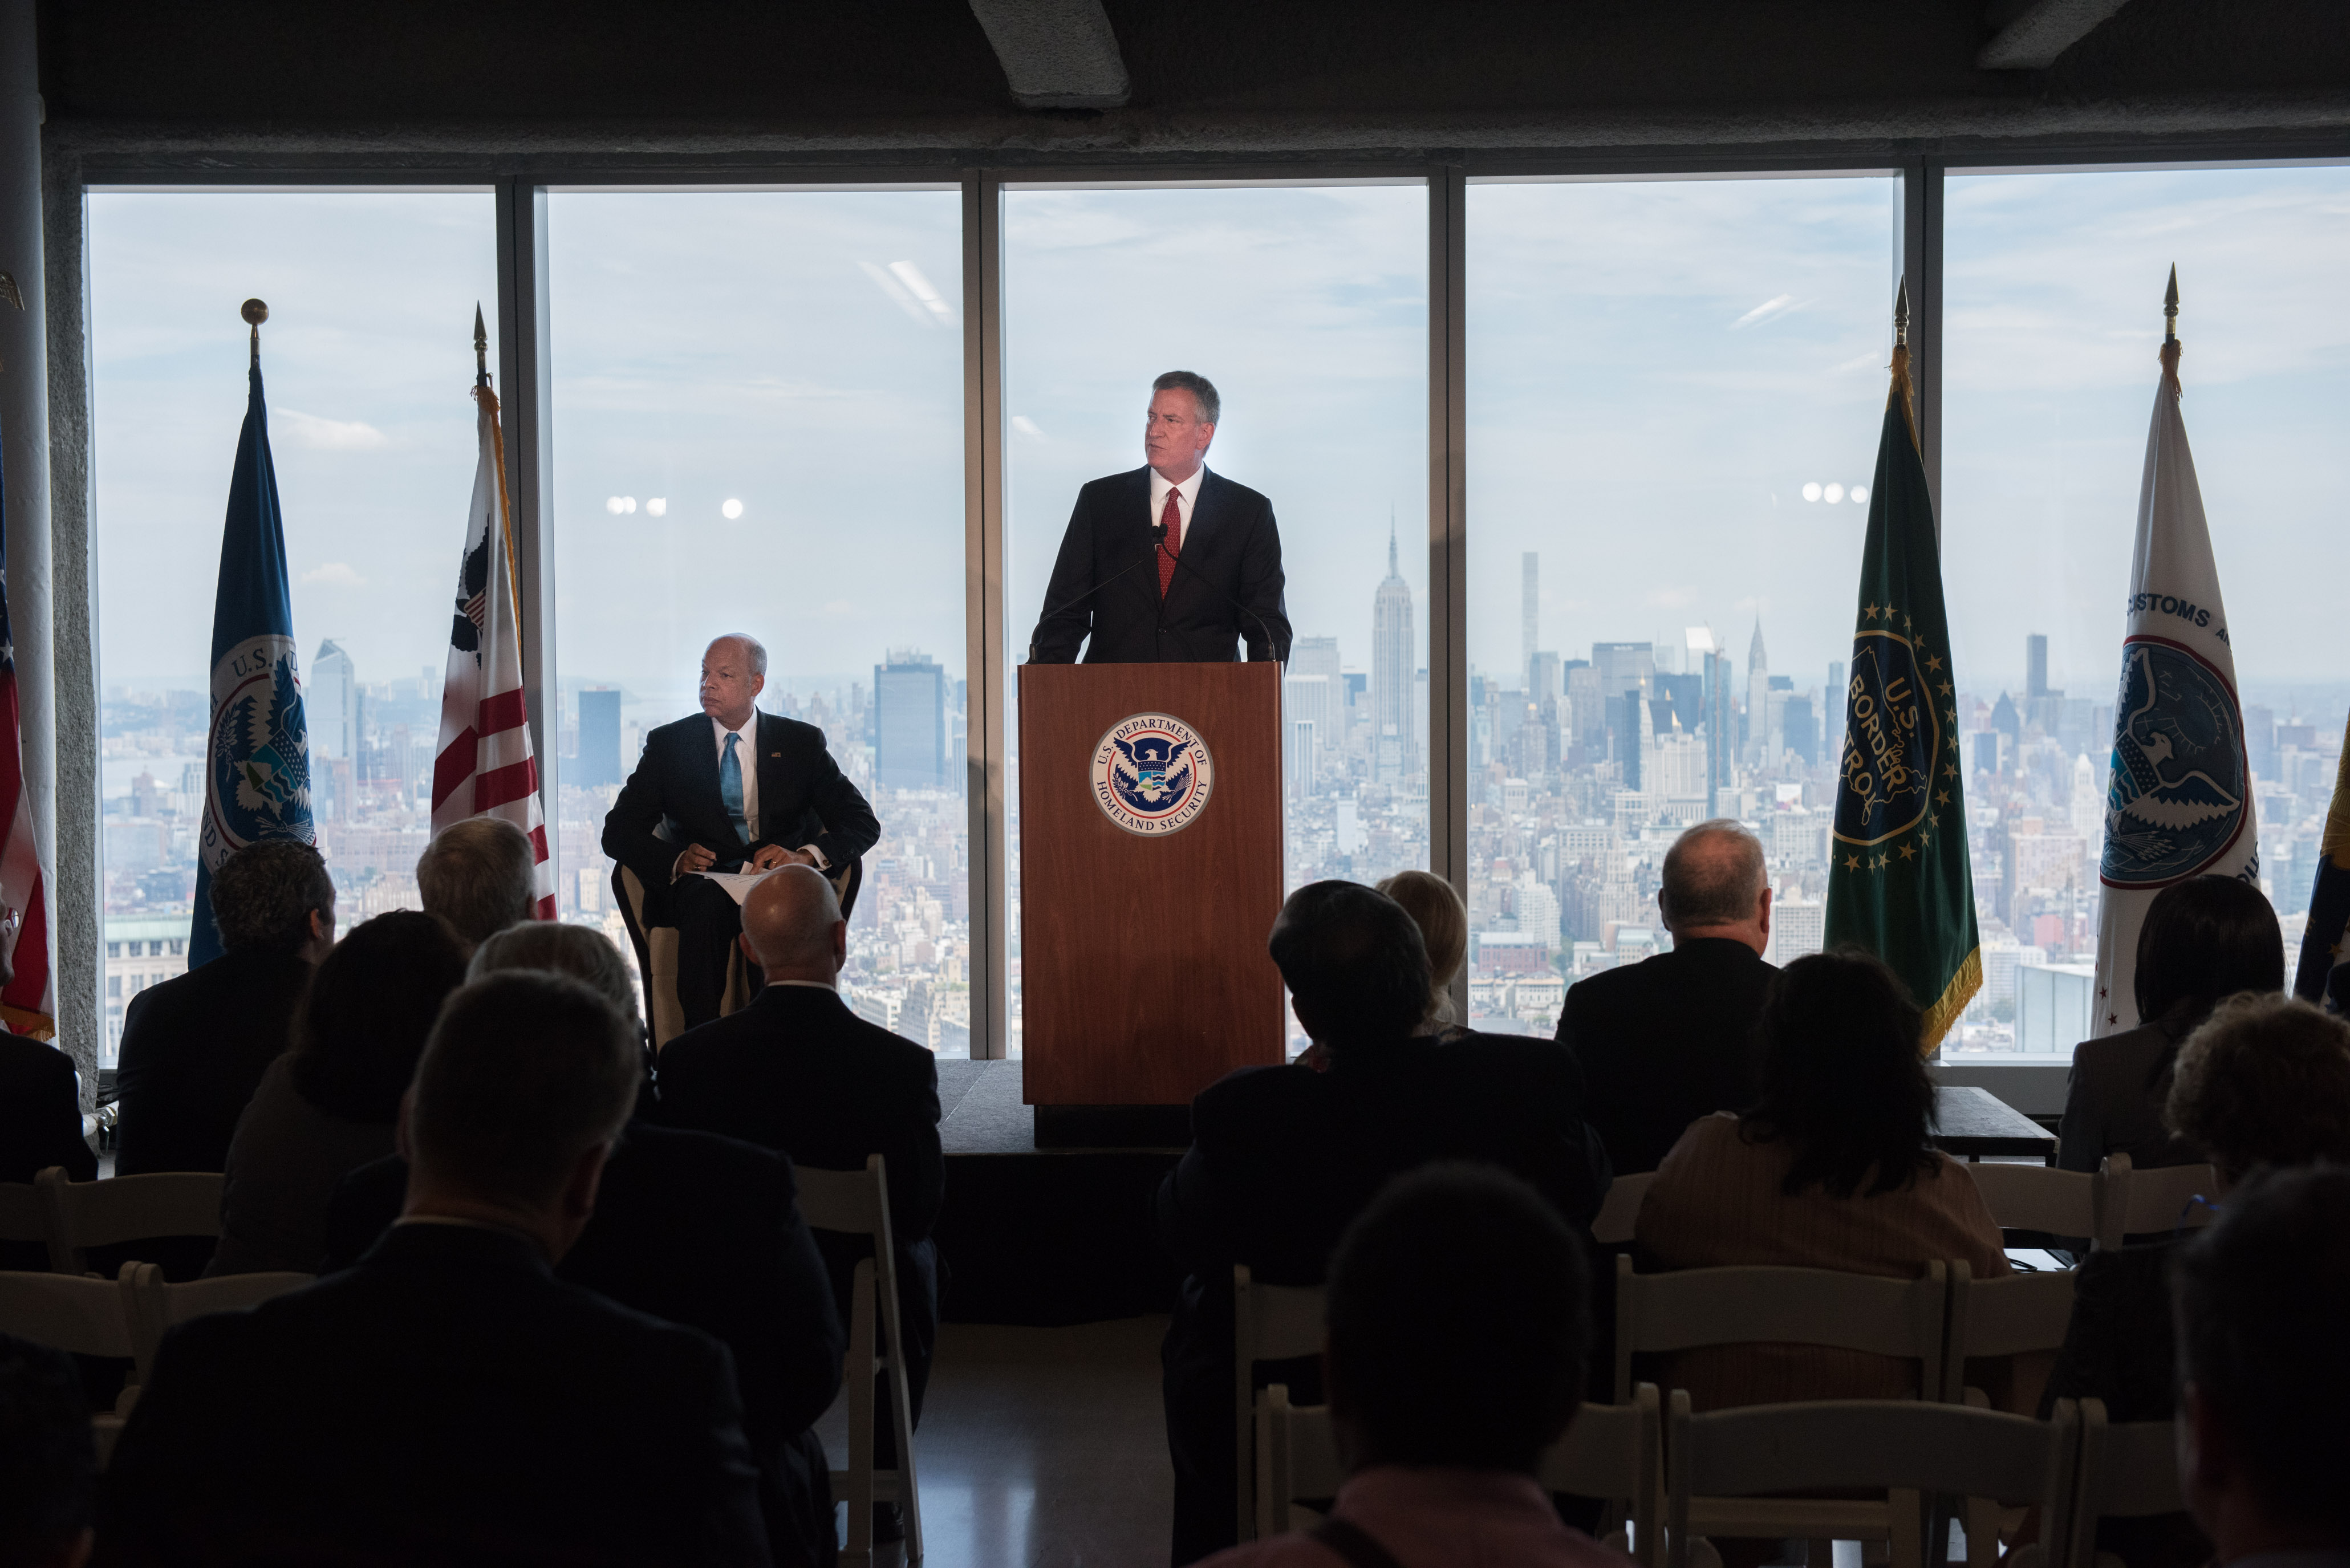 Mayor Bill de Blasio delivers remarks at an event hosted by Secretary of Homeland Security Jeh Johnson commemorating the federal government’s return to One World Trade Center.